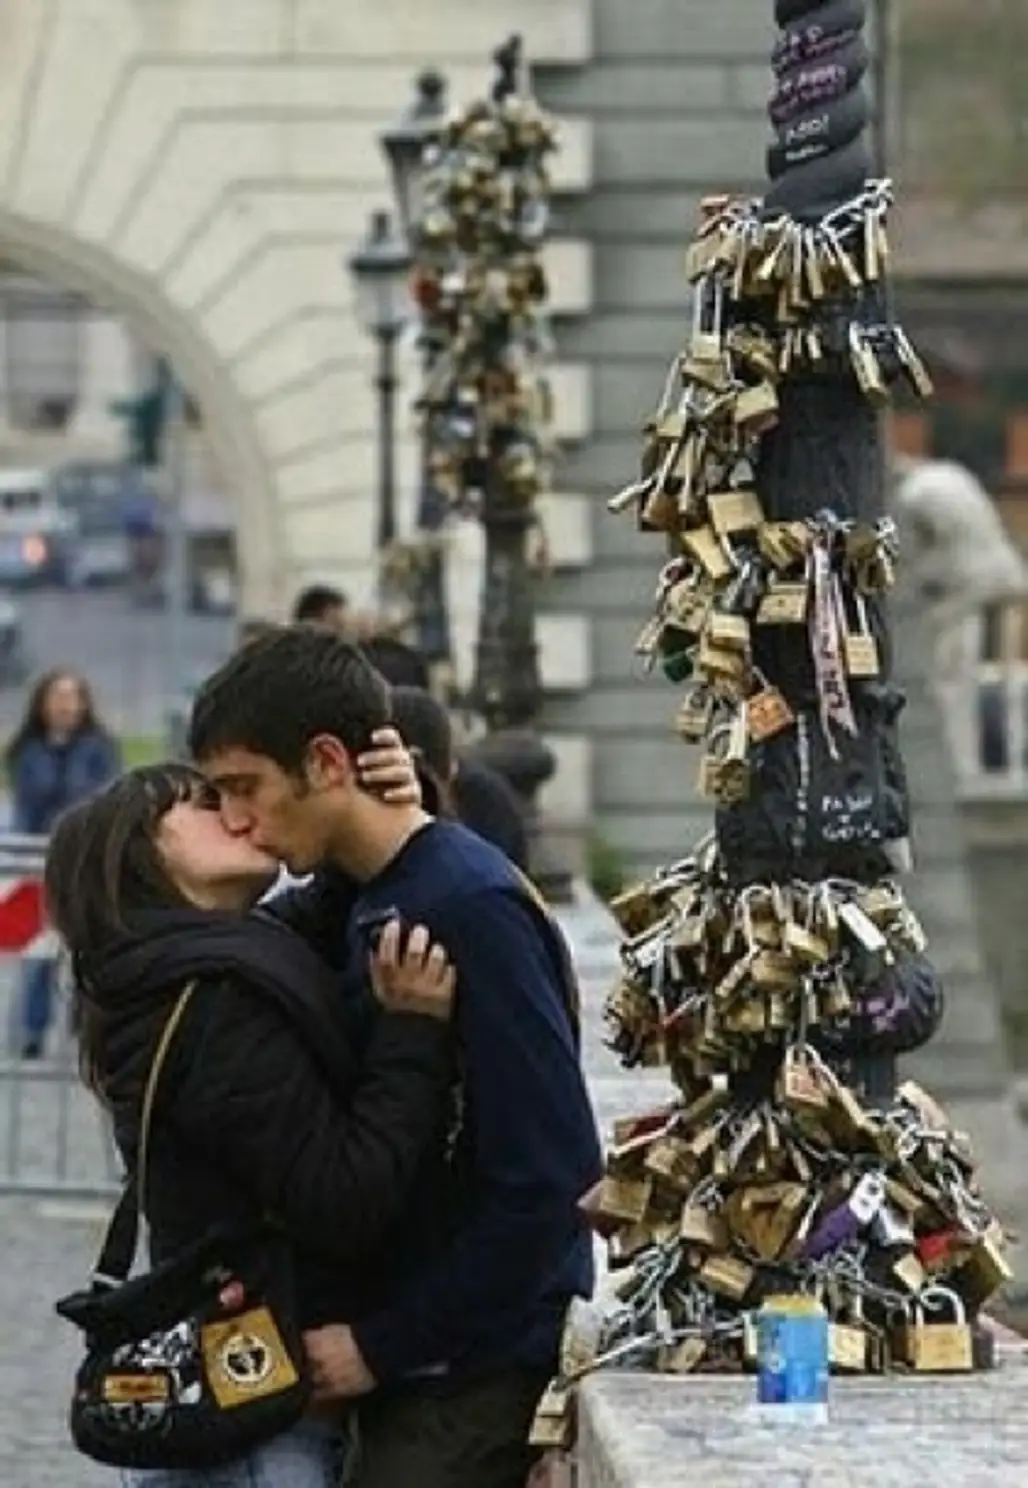 If You Want to Kiss, Go to Italy